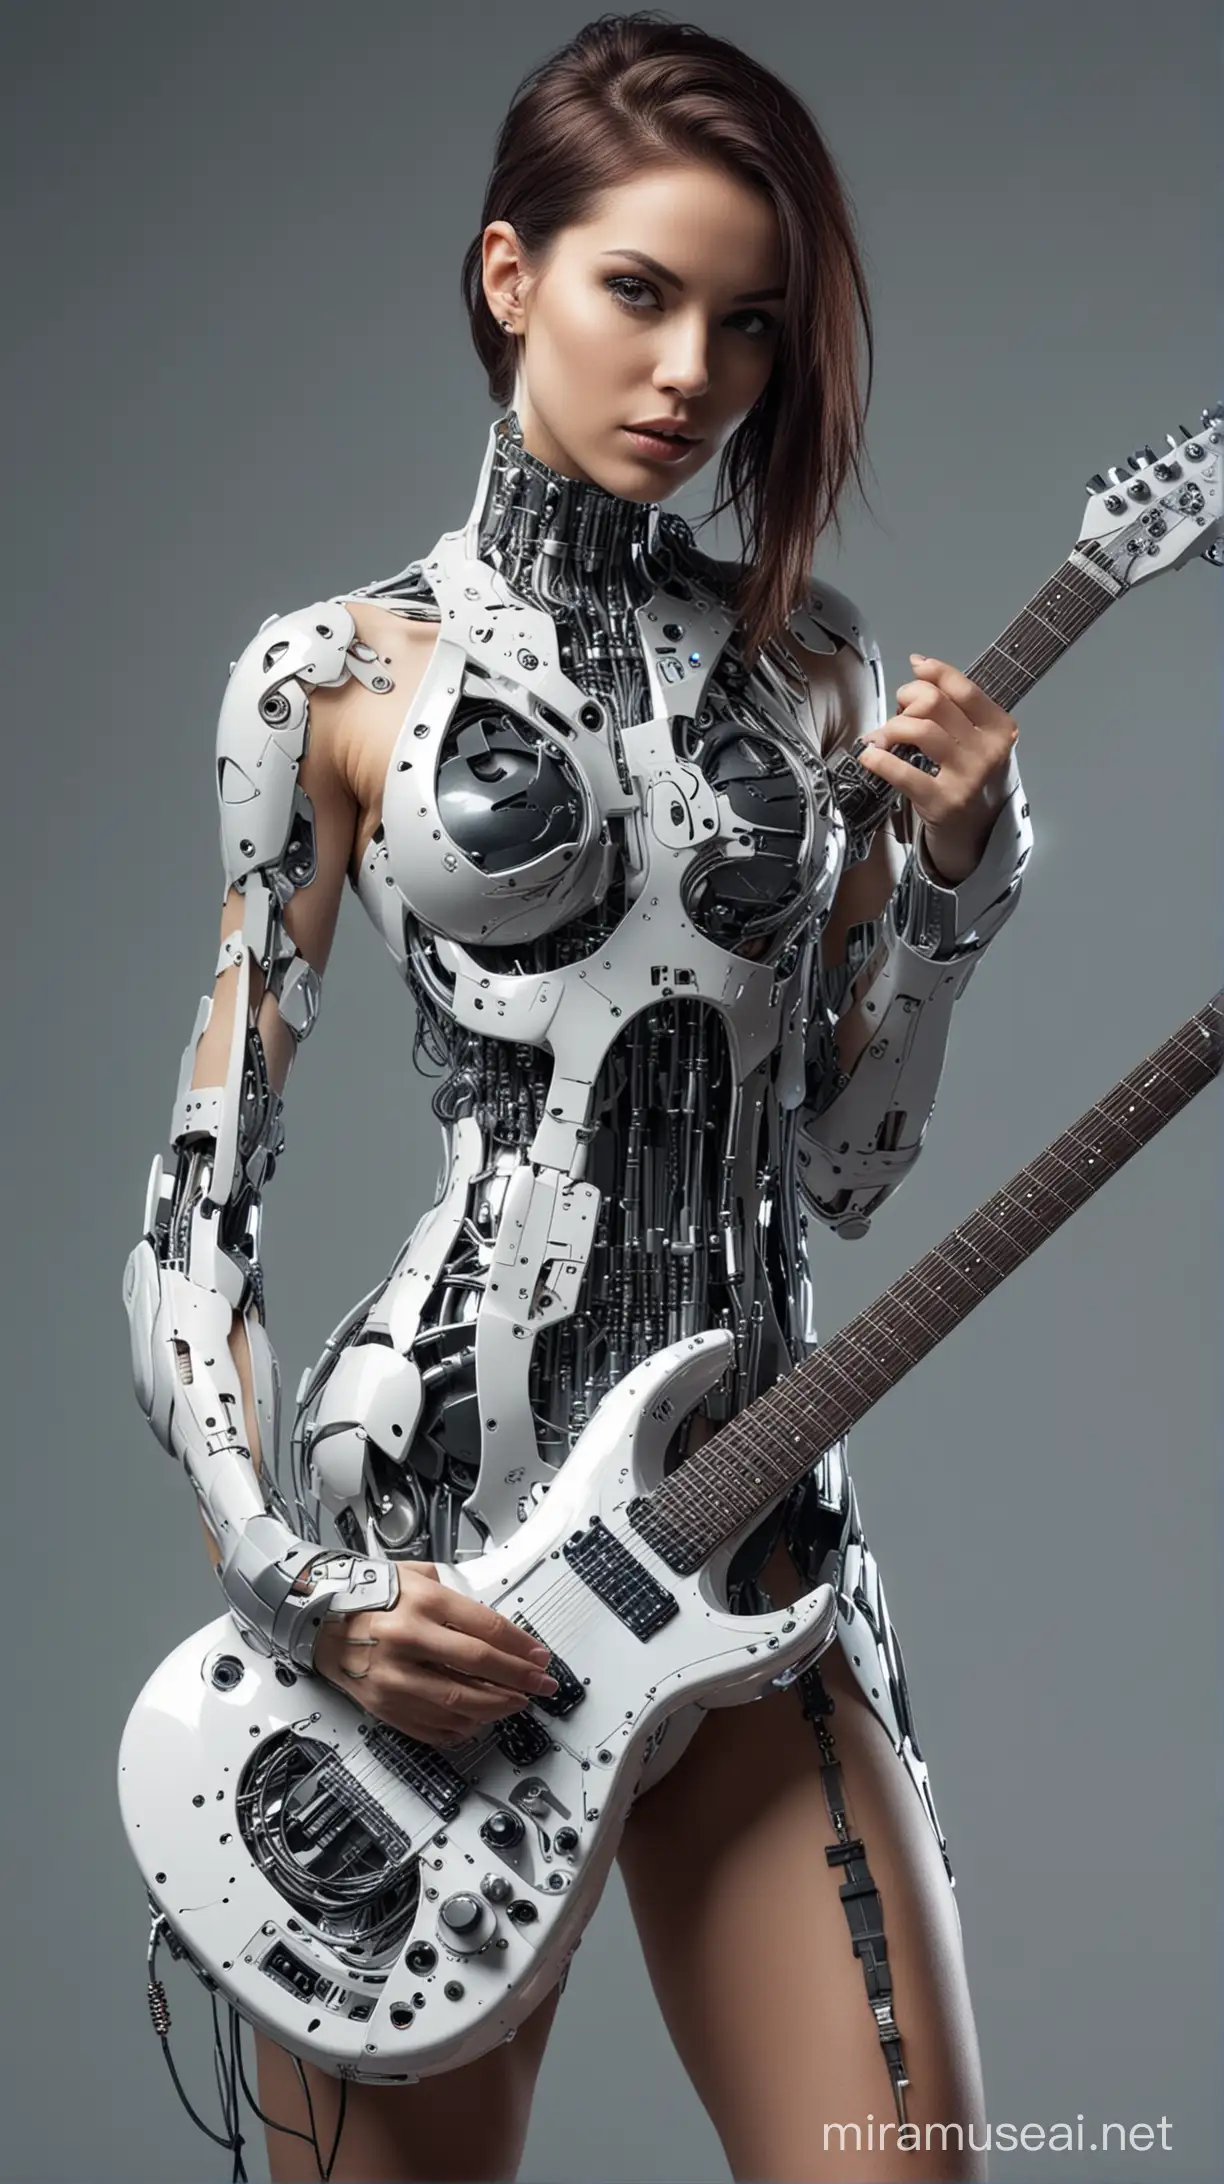 Futuristic Cybernetic Woman Playing Guitar in Gigeresque Aesthetic